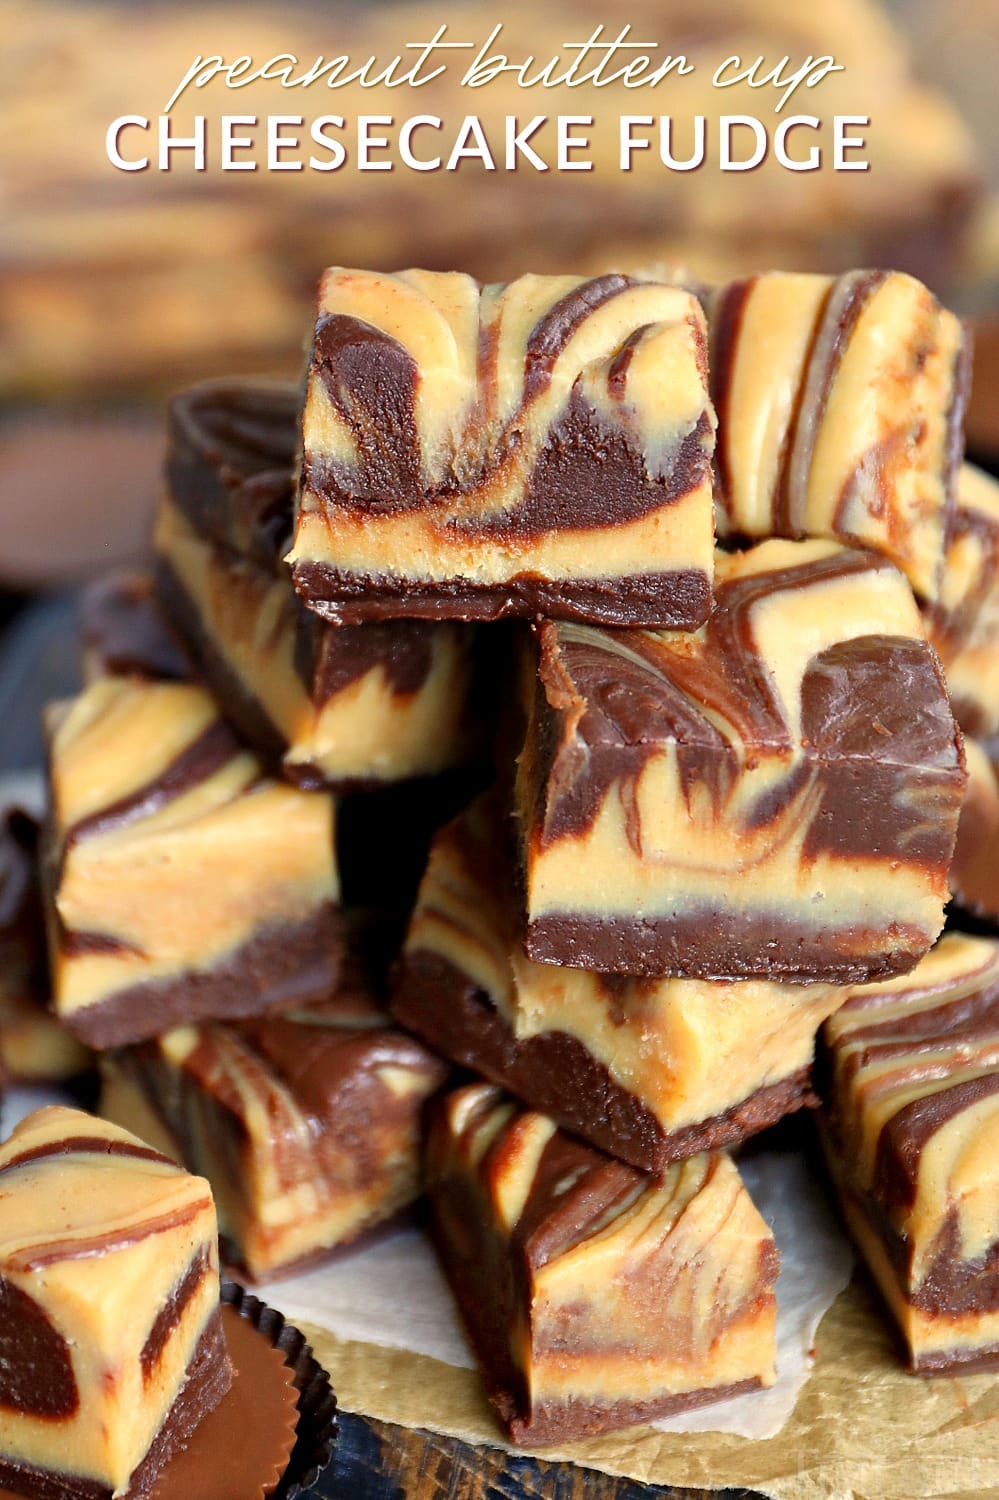 peanut-butter-cup-cheesecake-fudge-titled